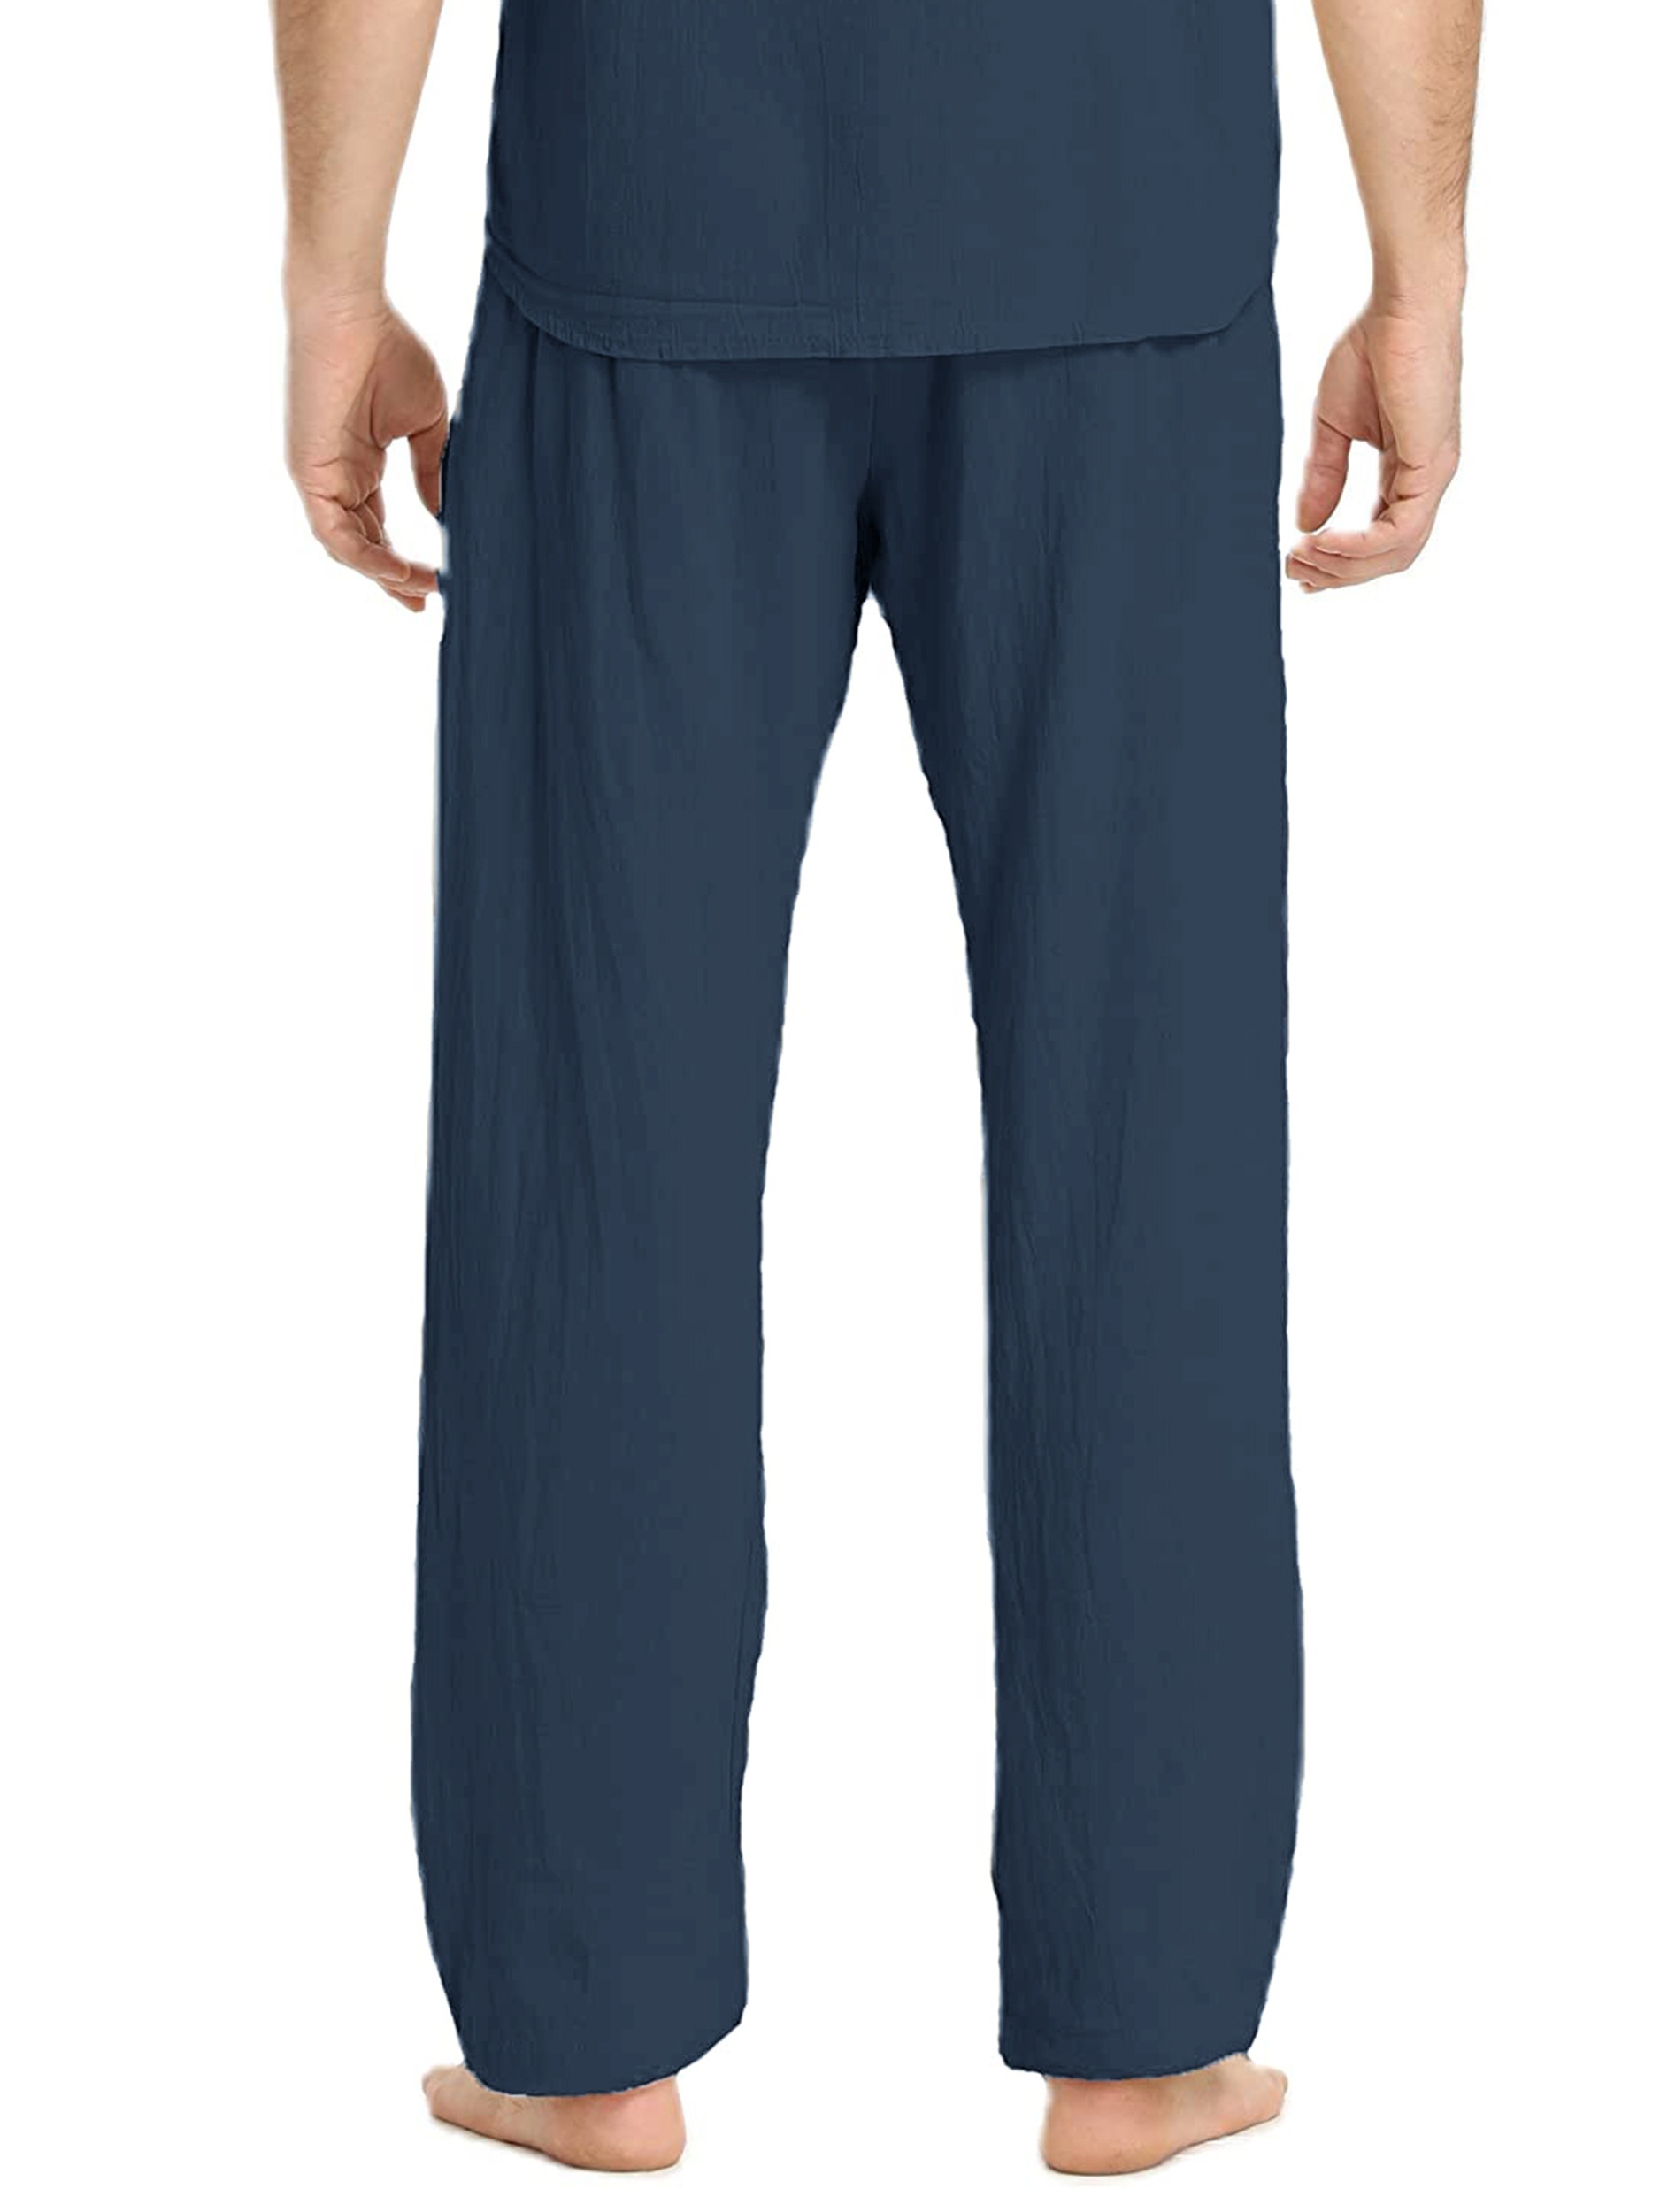 Mens Linen Drawstring Pants In A Baggy Look Without Zipper Regular And Plus  Size. – Liash